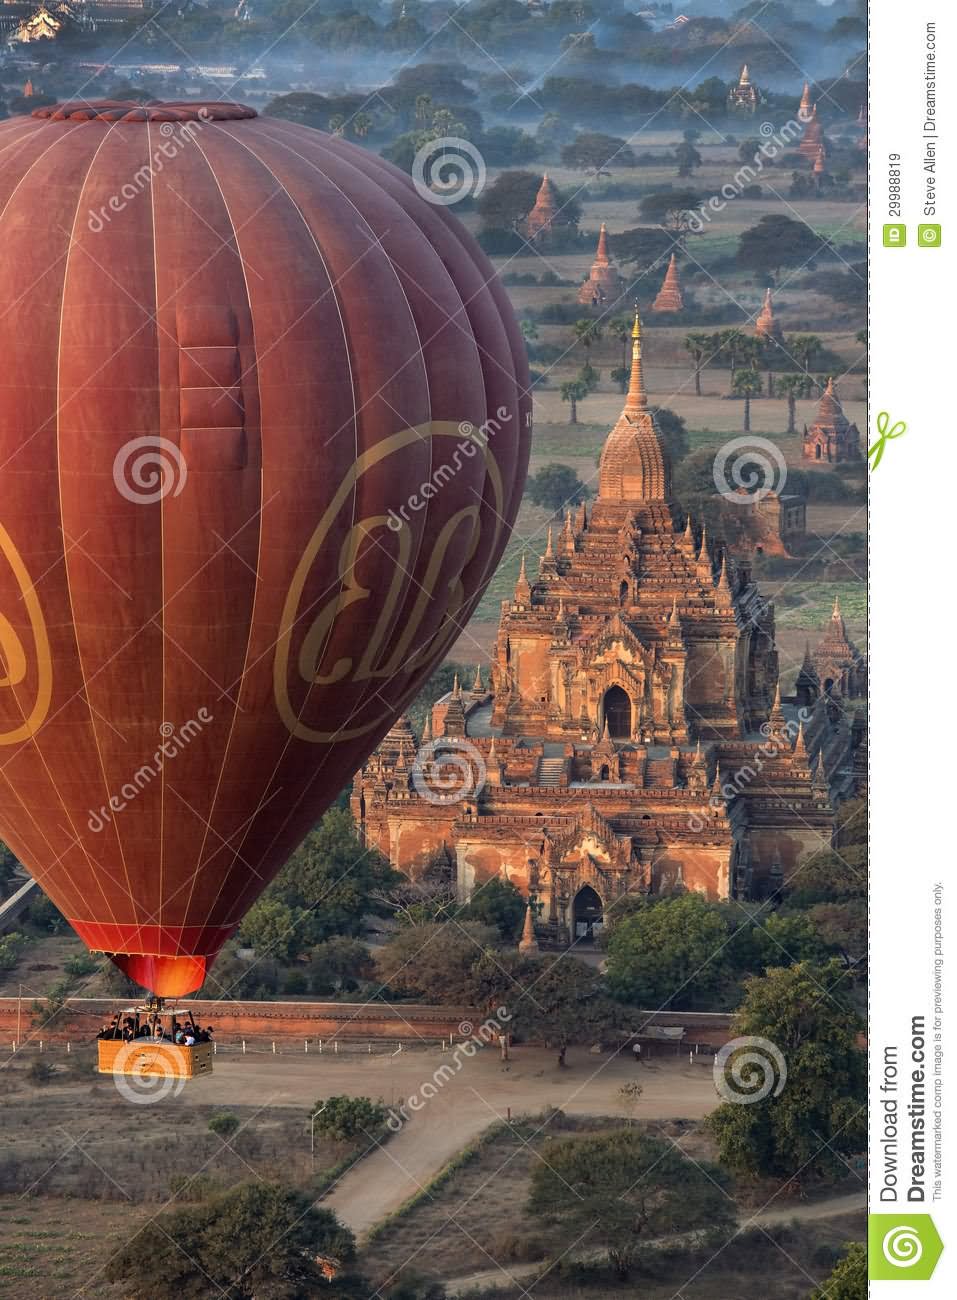 Hot Air Balloon View With Sulamani Temple, Myanmar